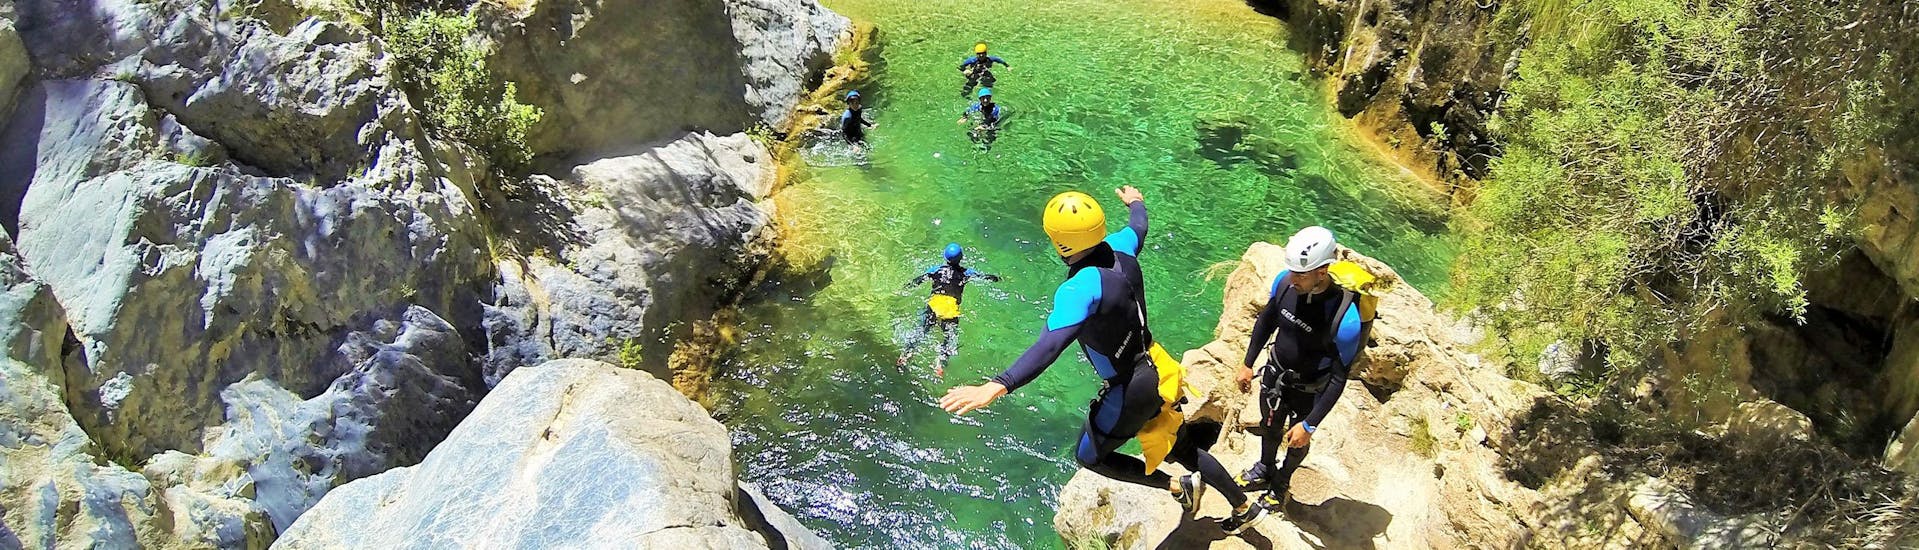 Canyoning in Río Verde, Granada - Beginners Tour.